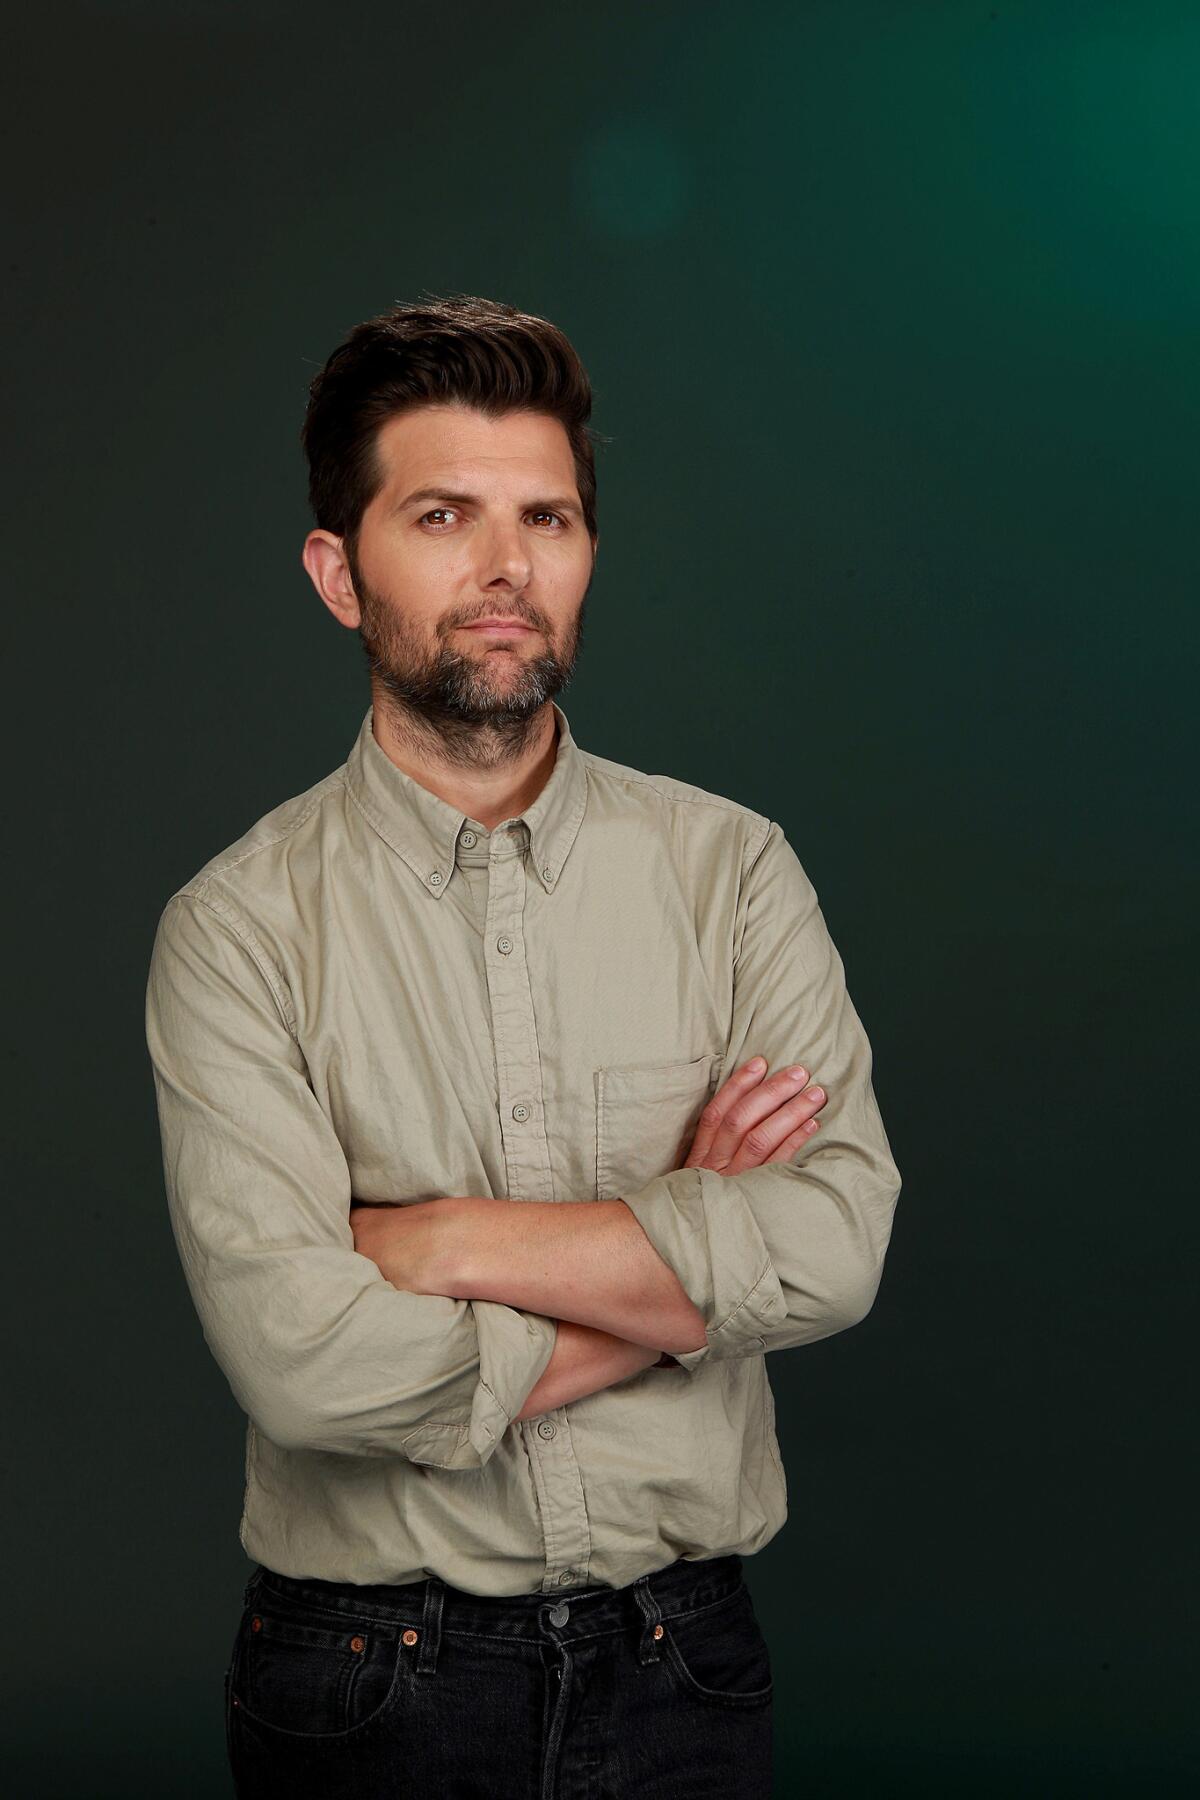 Adam Scott appeared in a CBS All Access The Twilight Zone episode called "Nightmare at 30,000 Feet." The title of the episode, is a riff on one of the original show's more famous episodes, "Nightmare at 20,000 Feet."